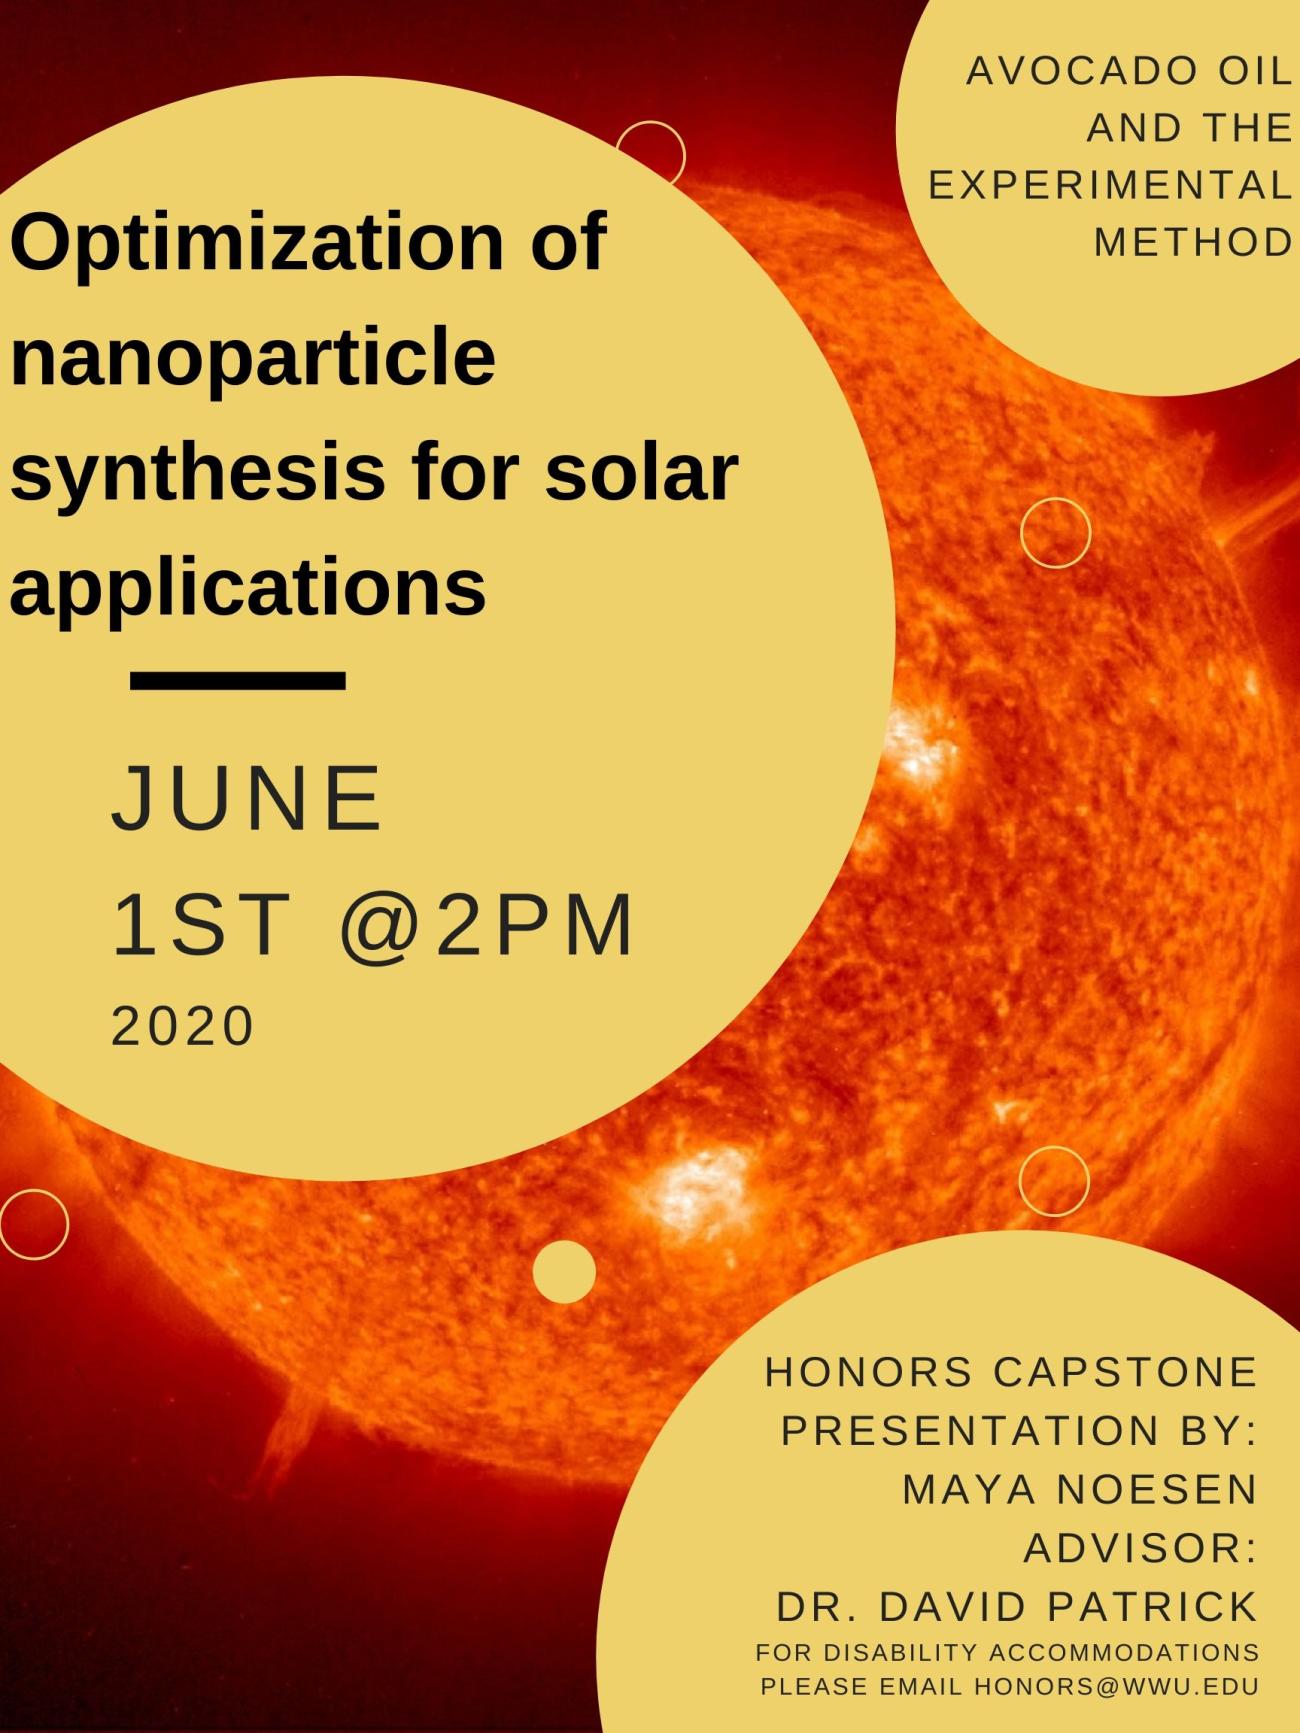 Image of the sun overlaid by orange circles.  Text: "Optimization of nanoparticle synthesis for solar applications. Date: June 1st at 2pm 2020. Avocado Oil and the Experimental Method. Honors Capstone Presentation By Maya Noesen, Advisor Dr. David Patrick.  For disability accommodations, please emails the Honors program at honors@wwu.edu."